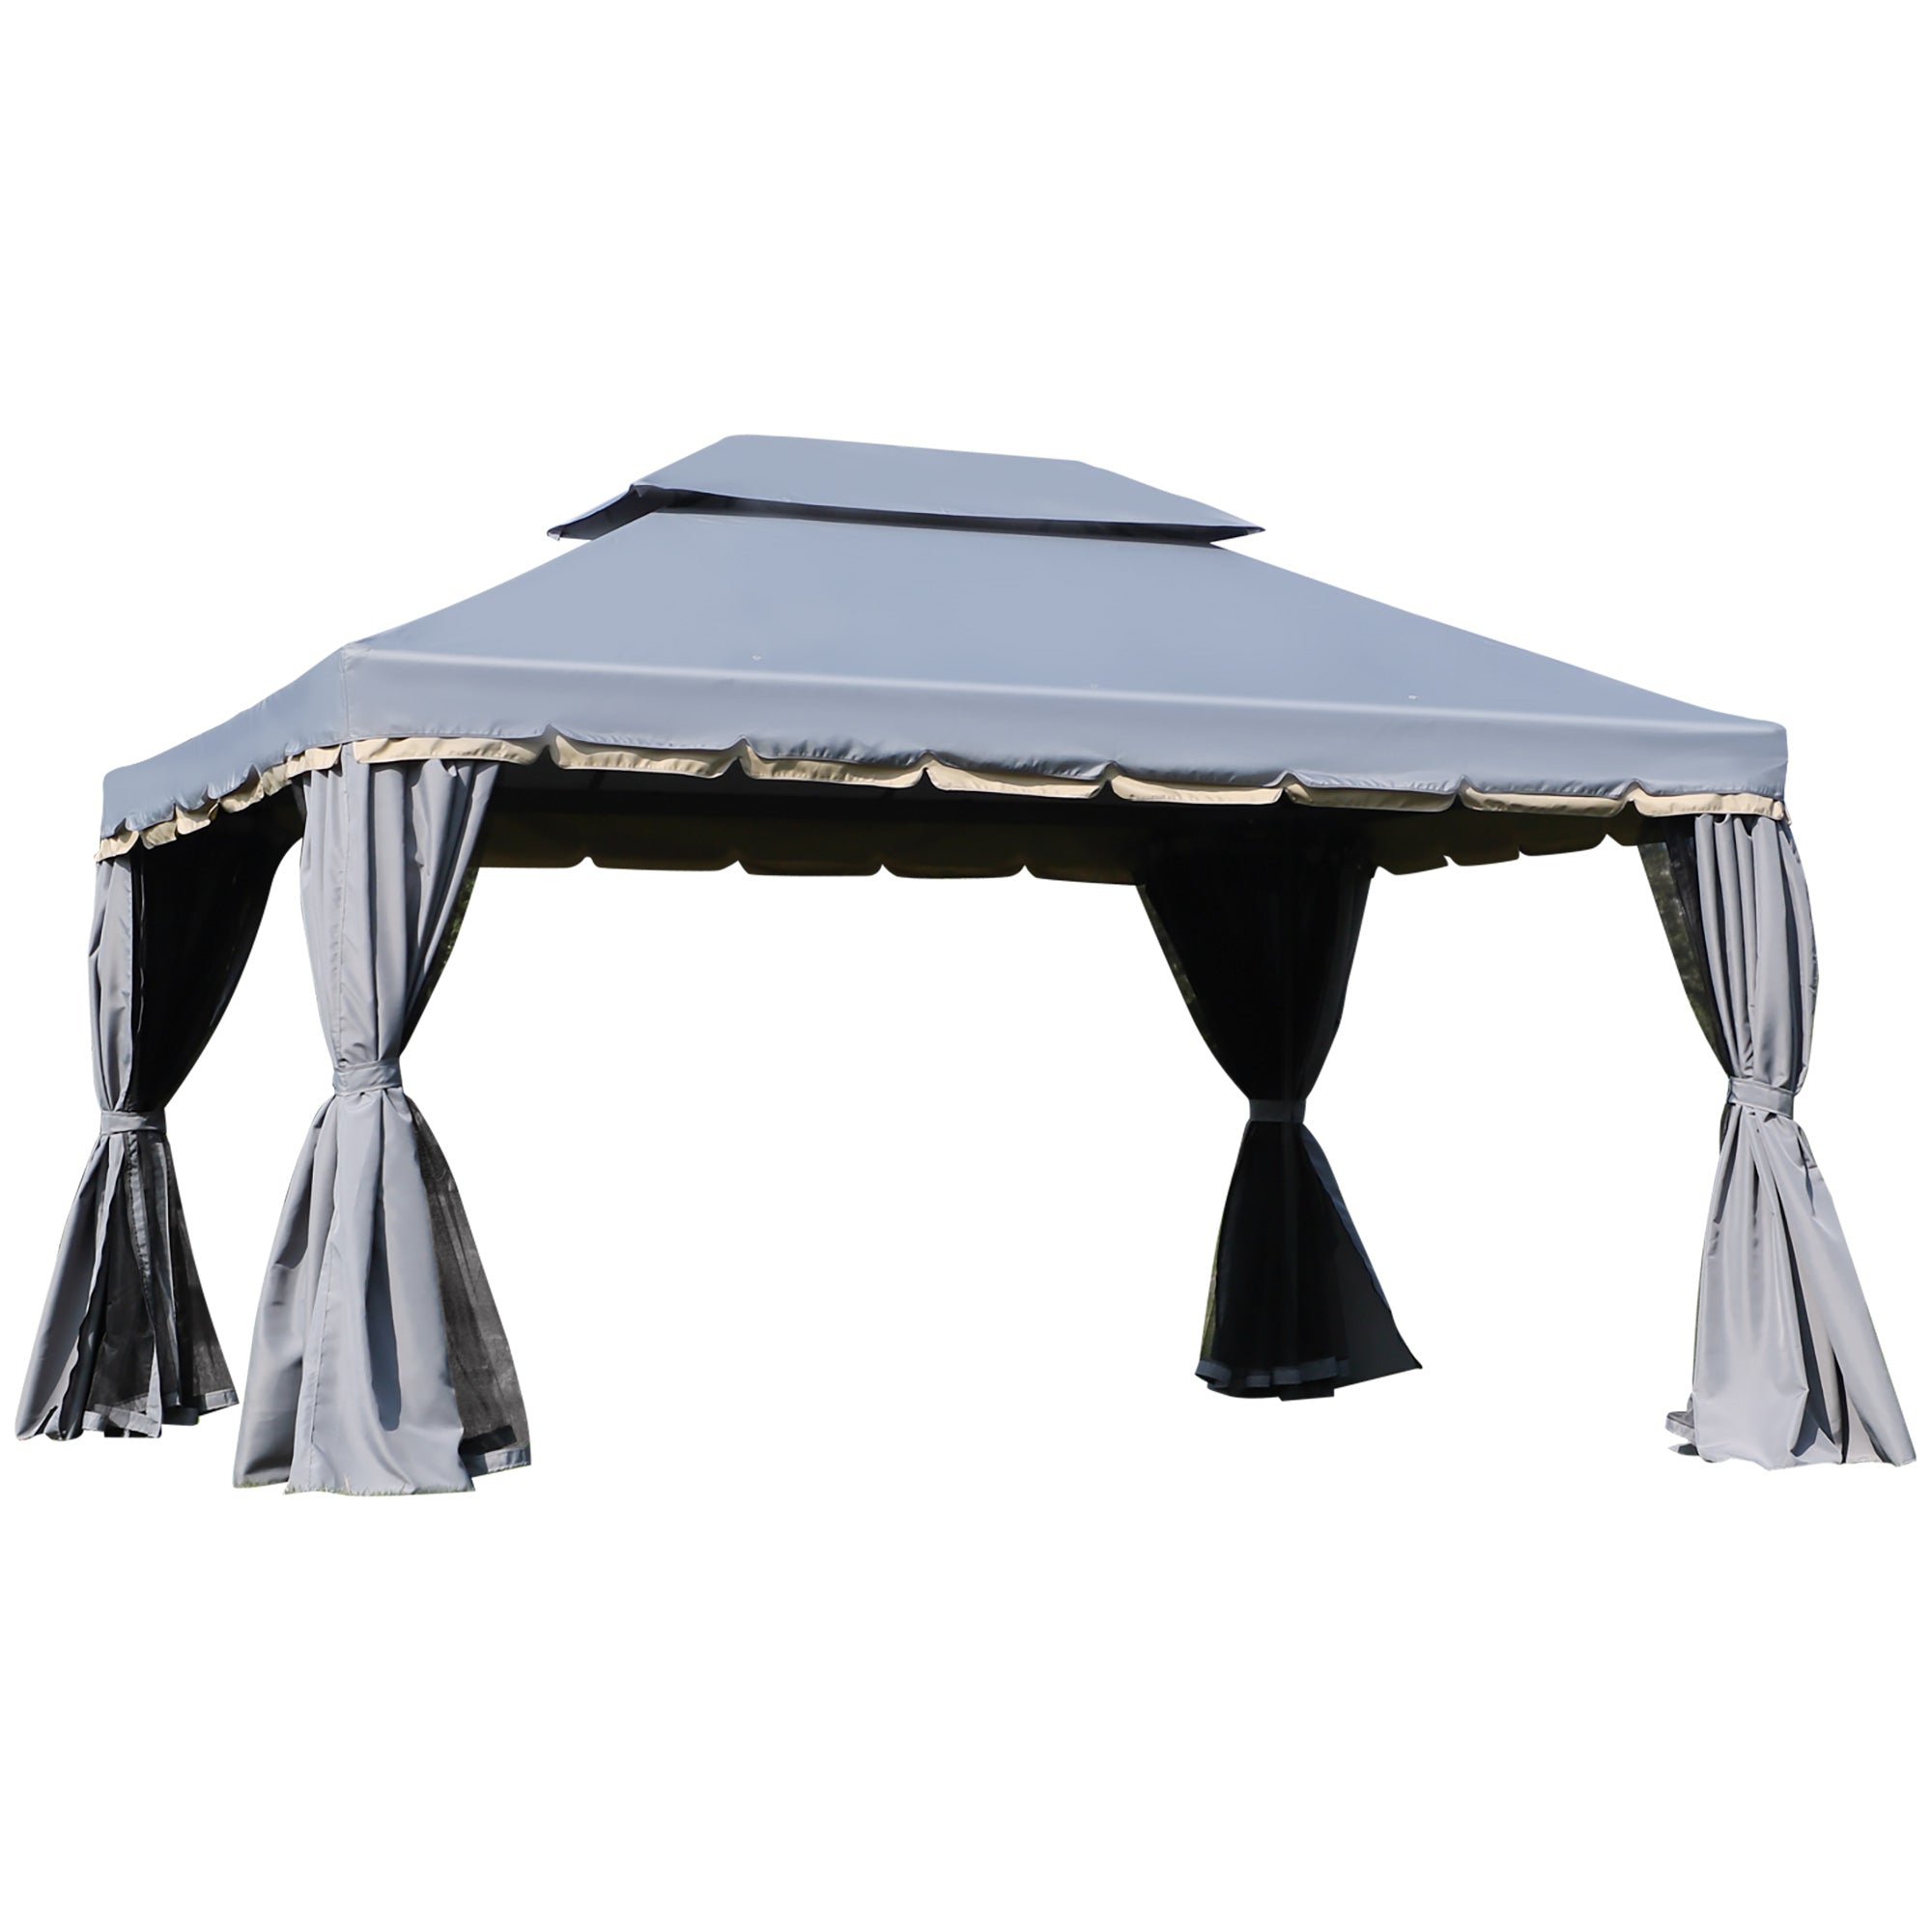 Outsunny 3 x 4m Aluminium Alloy Gazebo Marquee Canopy Pavilion Patio Garden Party Tent Shelter with Nets and Sidewalls - Grey - Inspirely